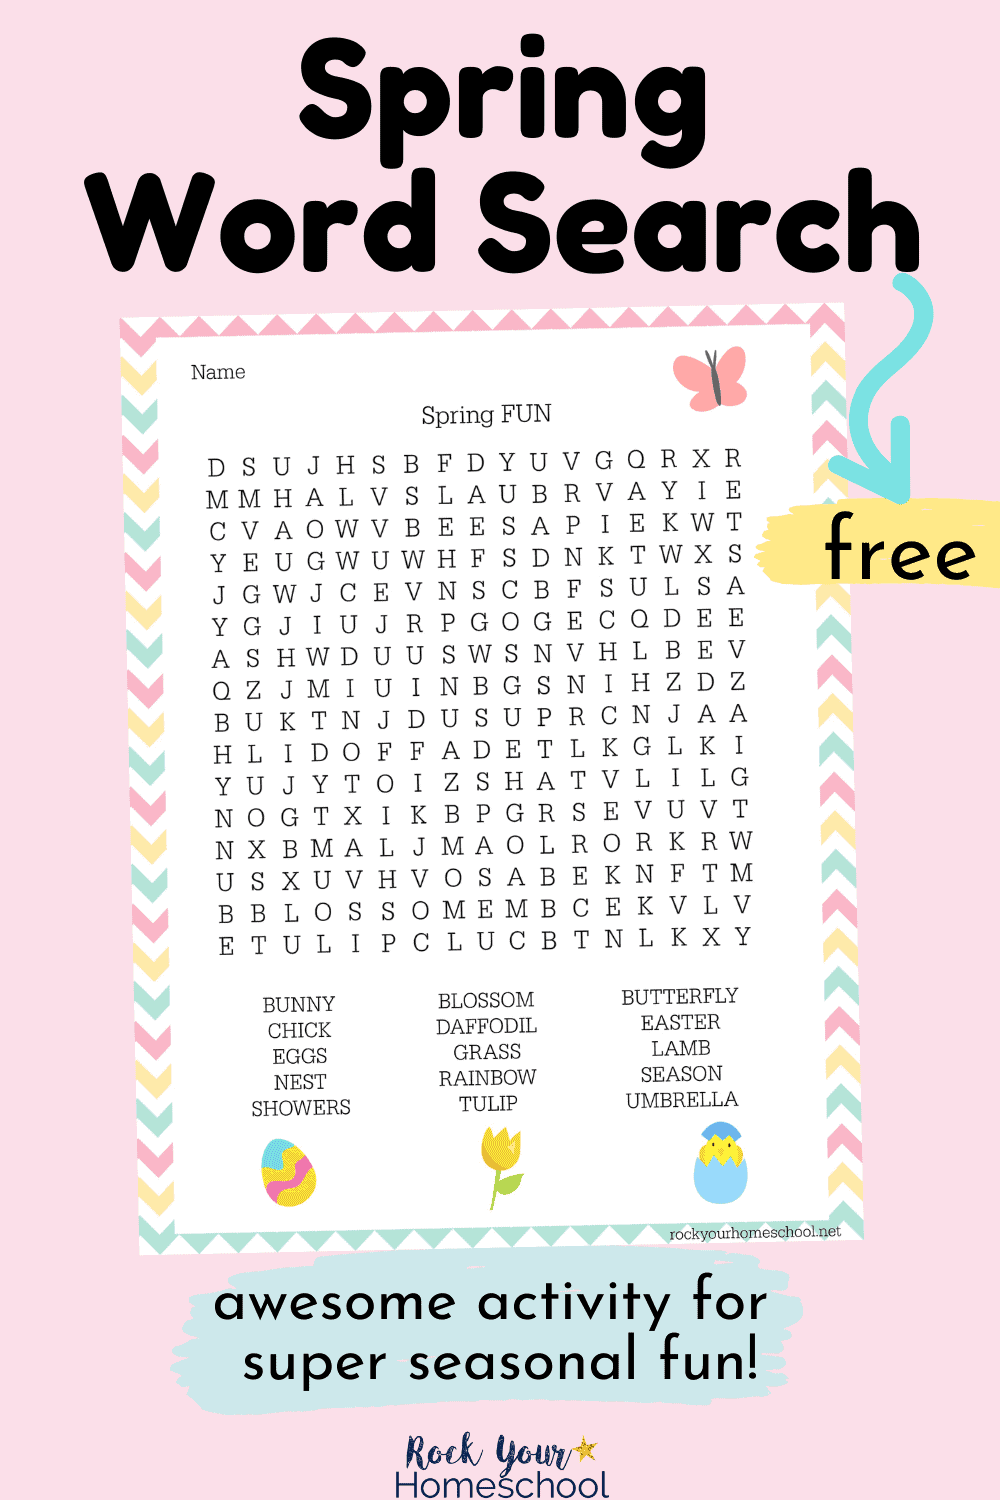 Spring word search for a free printable activity to enjoy for seasonal fun with kids